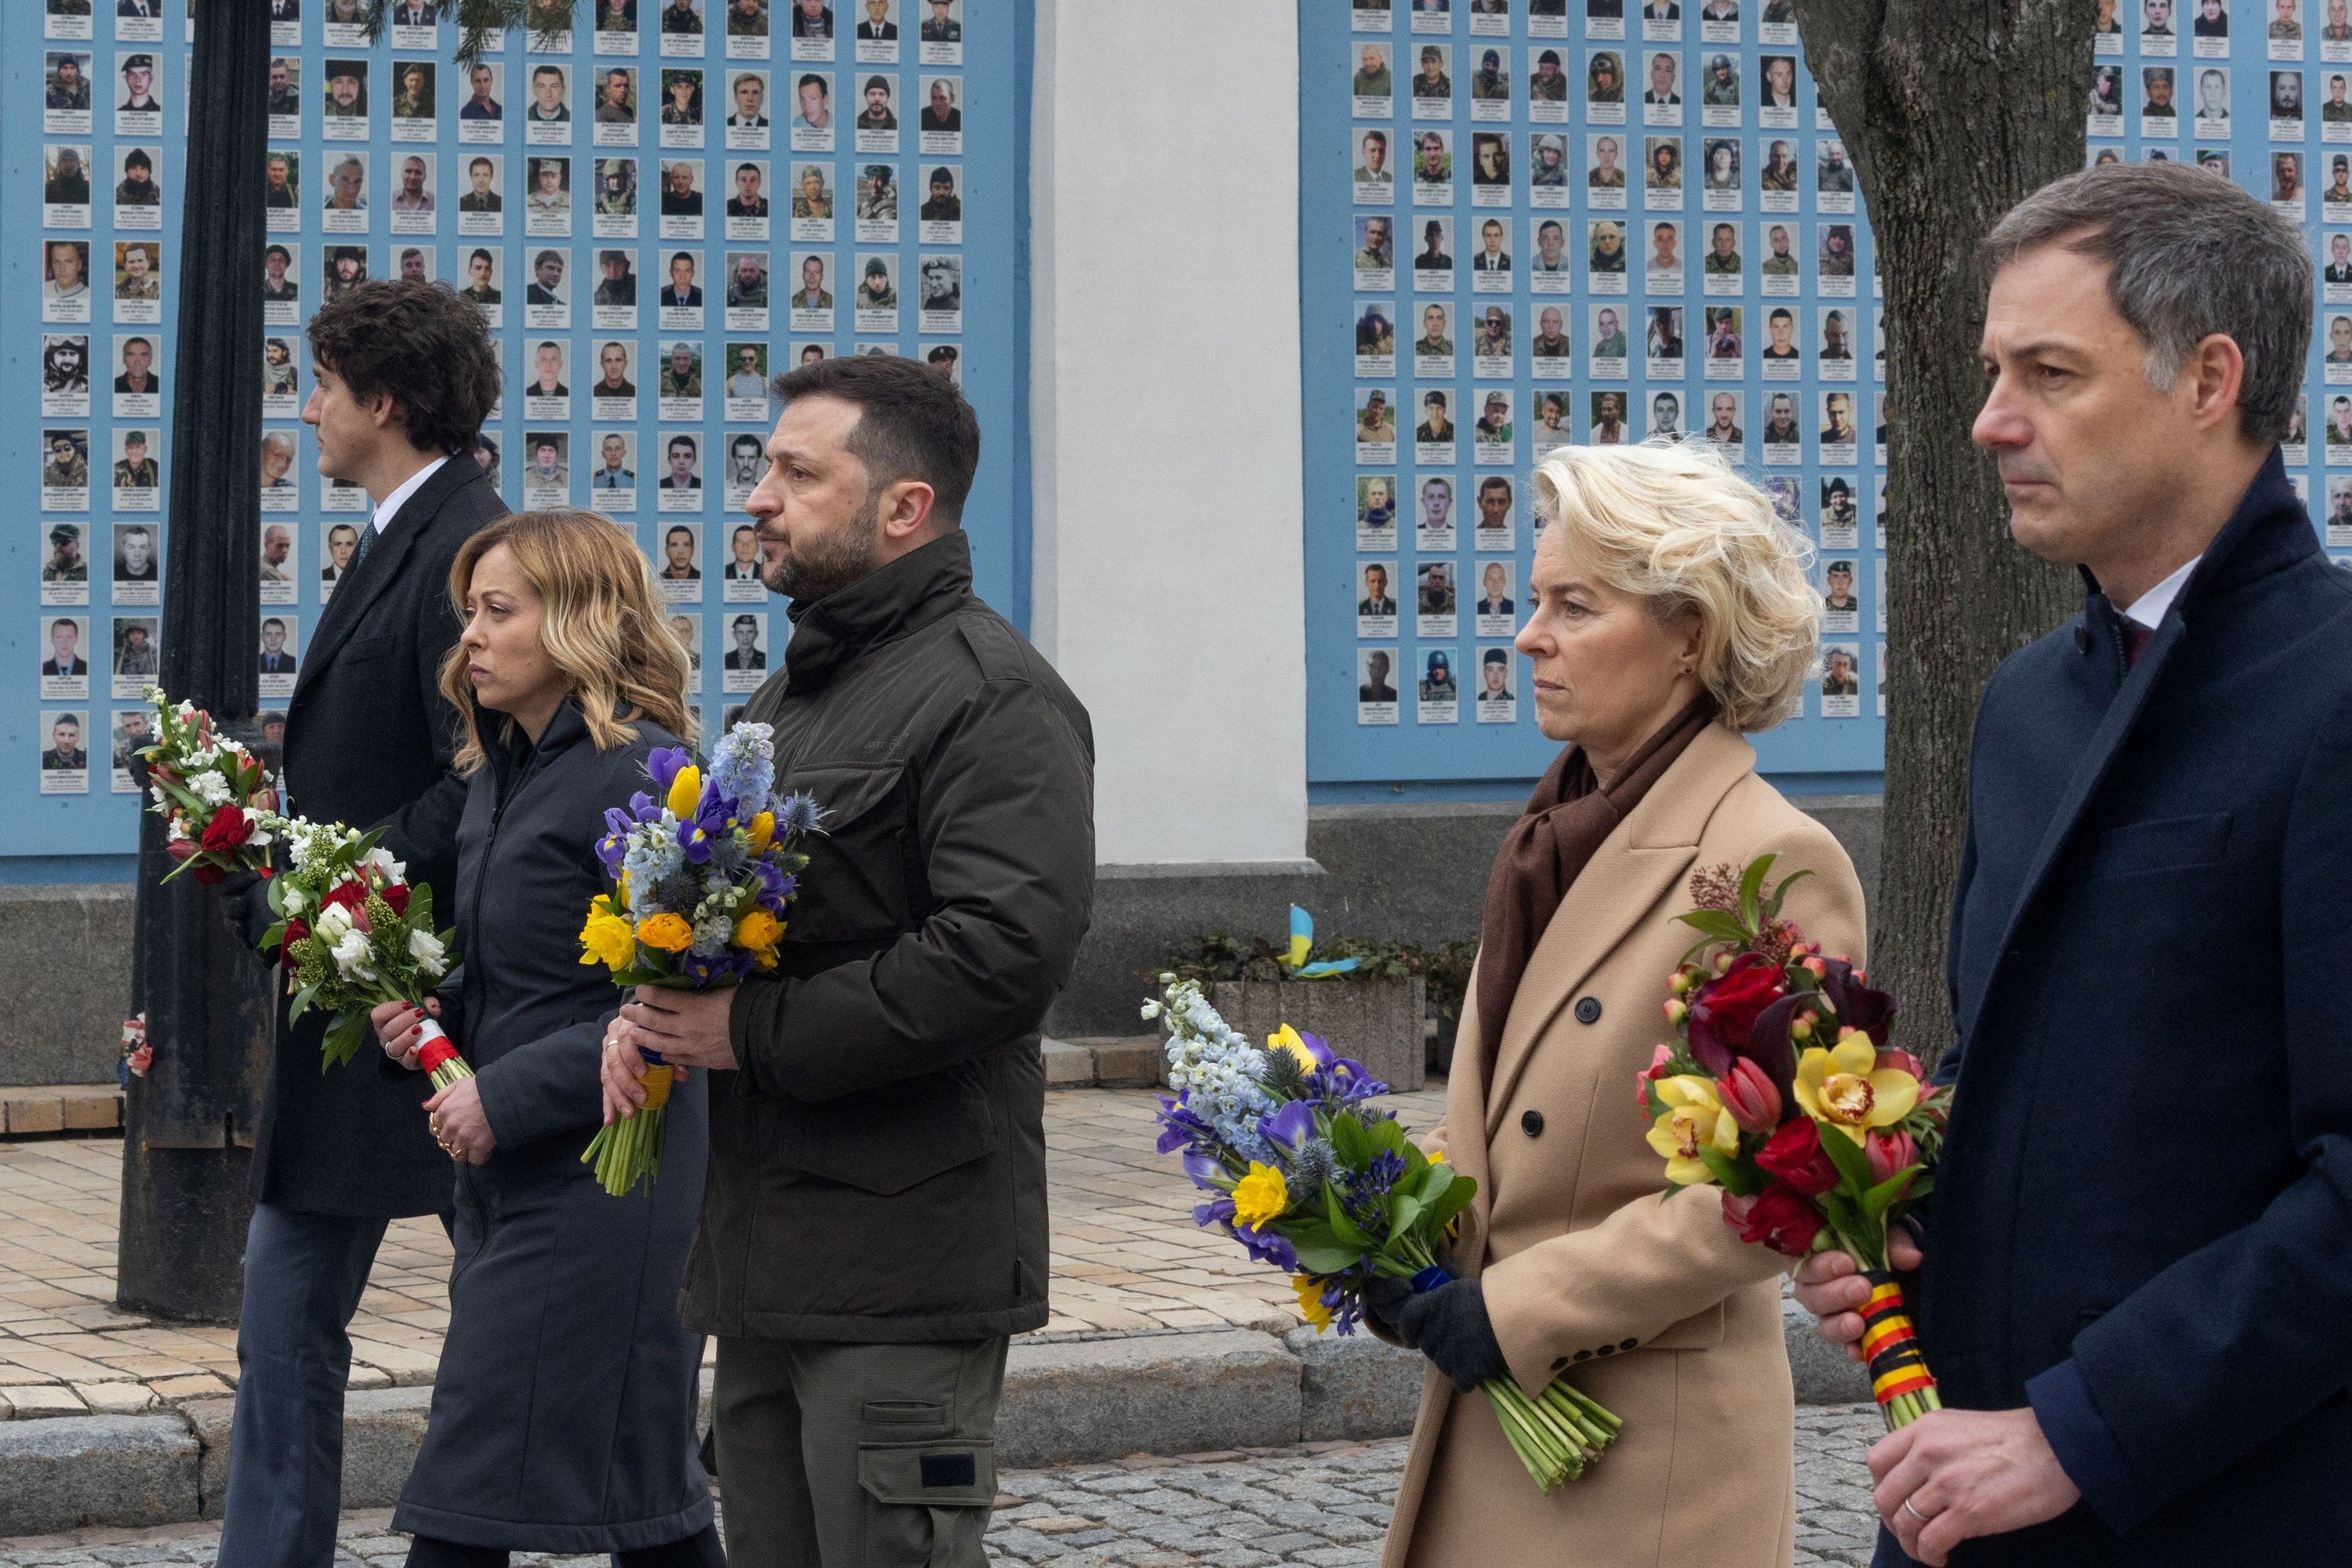 Volodymyr Zelensky, centre, is joined in Kyiv by, left to right, Justin Trudeau, Georgia Meloni, Ursula von der Leyen and Alexander De Croo